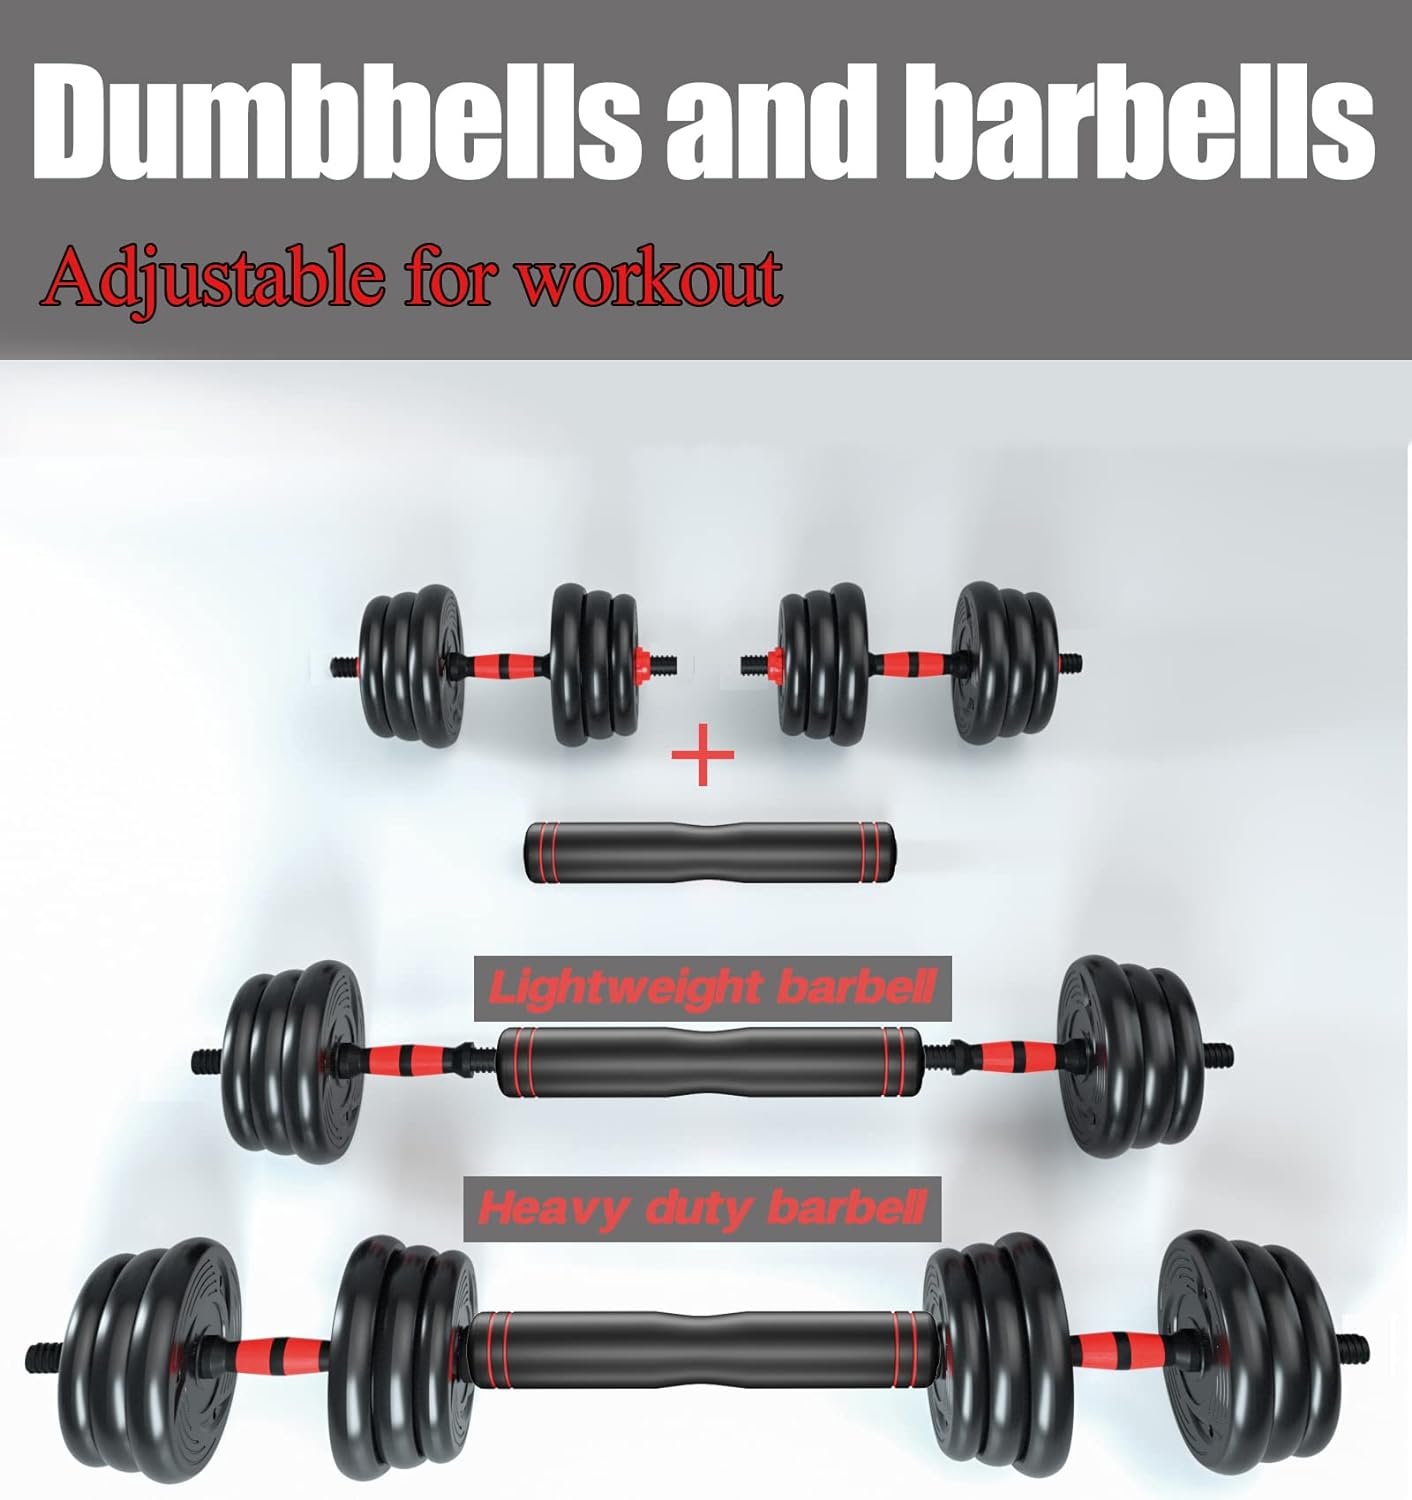 CANMALCHI Adjustable Dumbbells Weights Set 20lbs/33lbs/44lbs for Indoor Workout Dumbbell Weight Barbell Perfect for Bodybuilding Fitness Lifting Training Home Gym Equipment